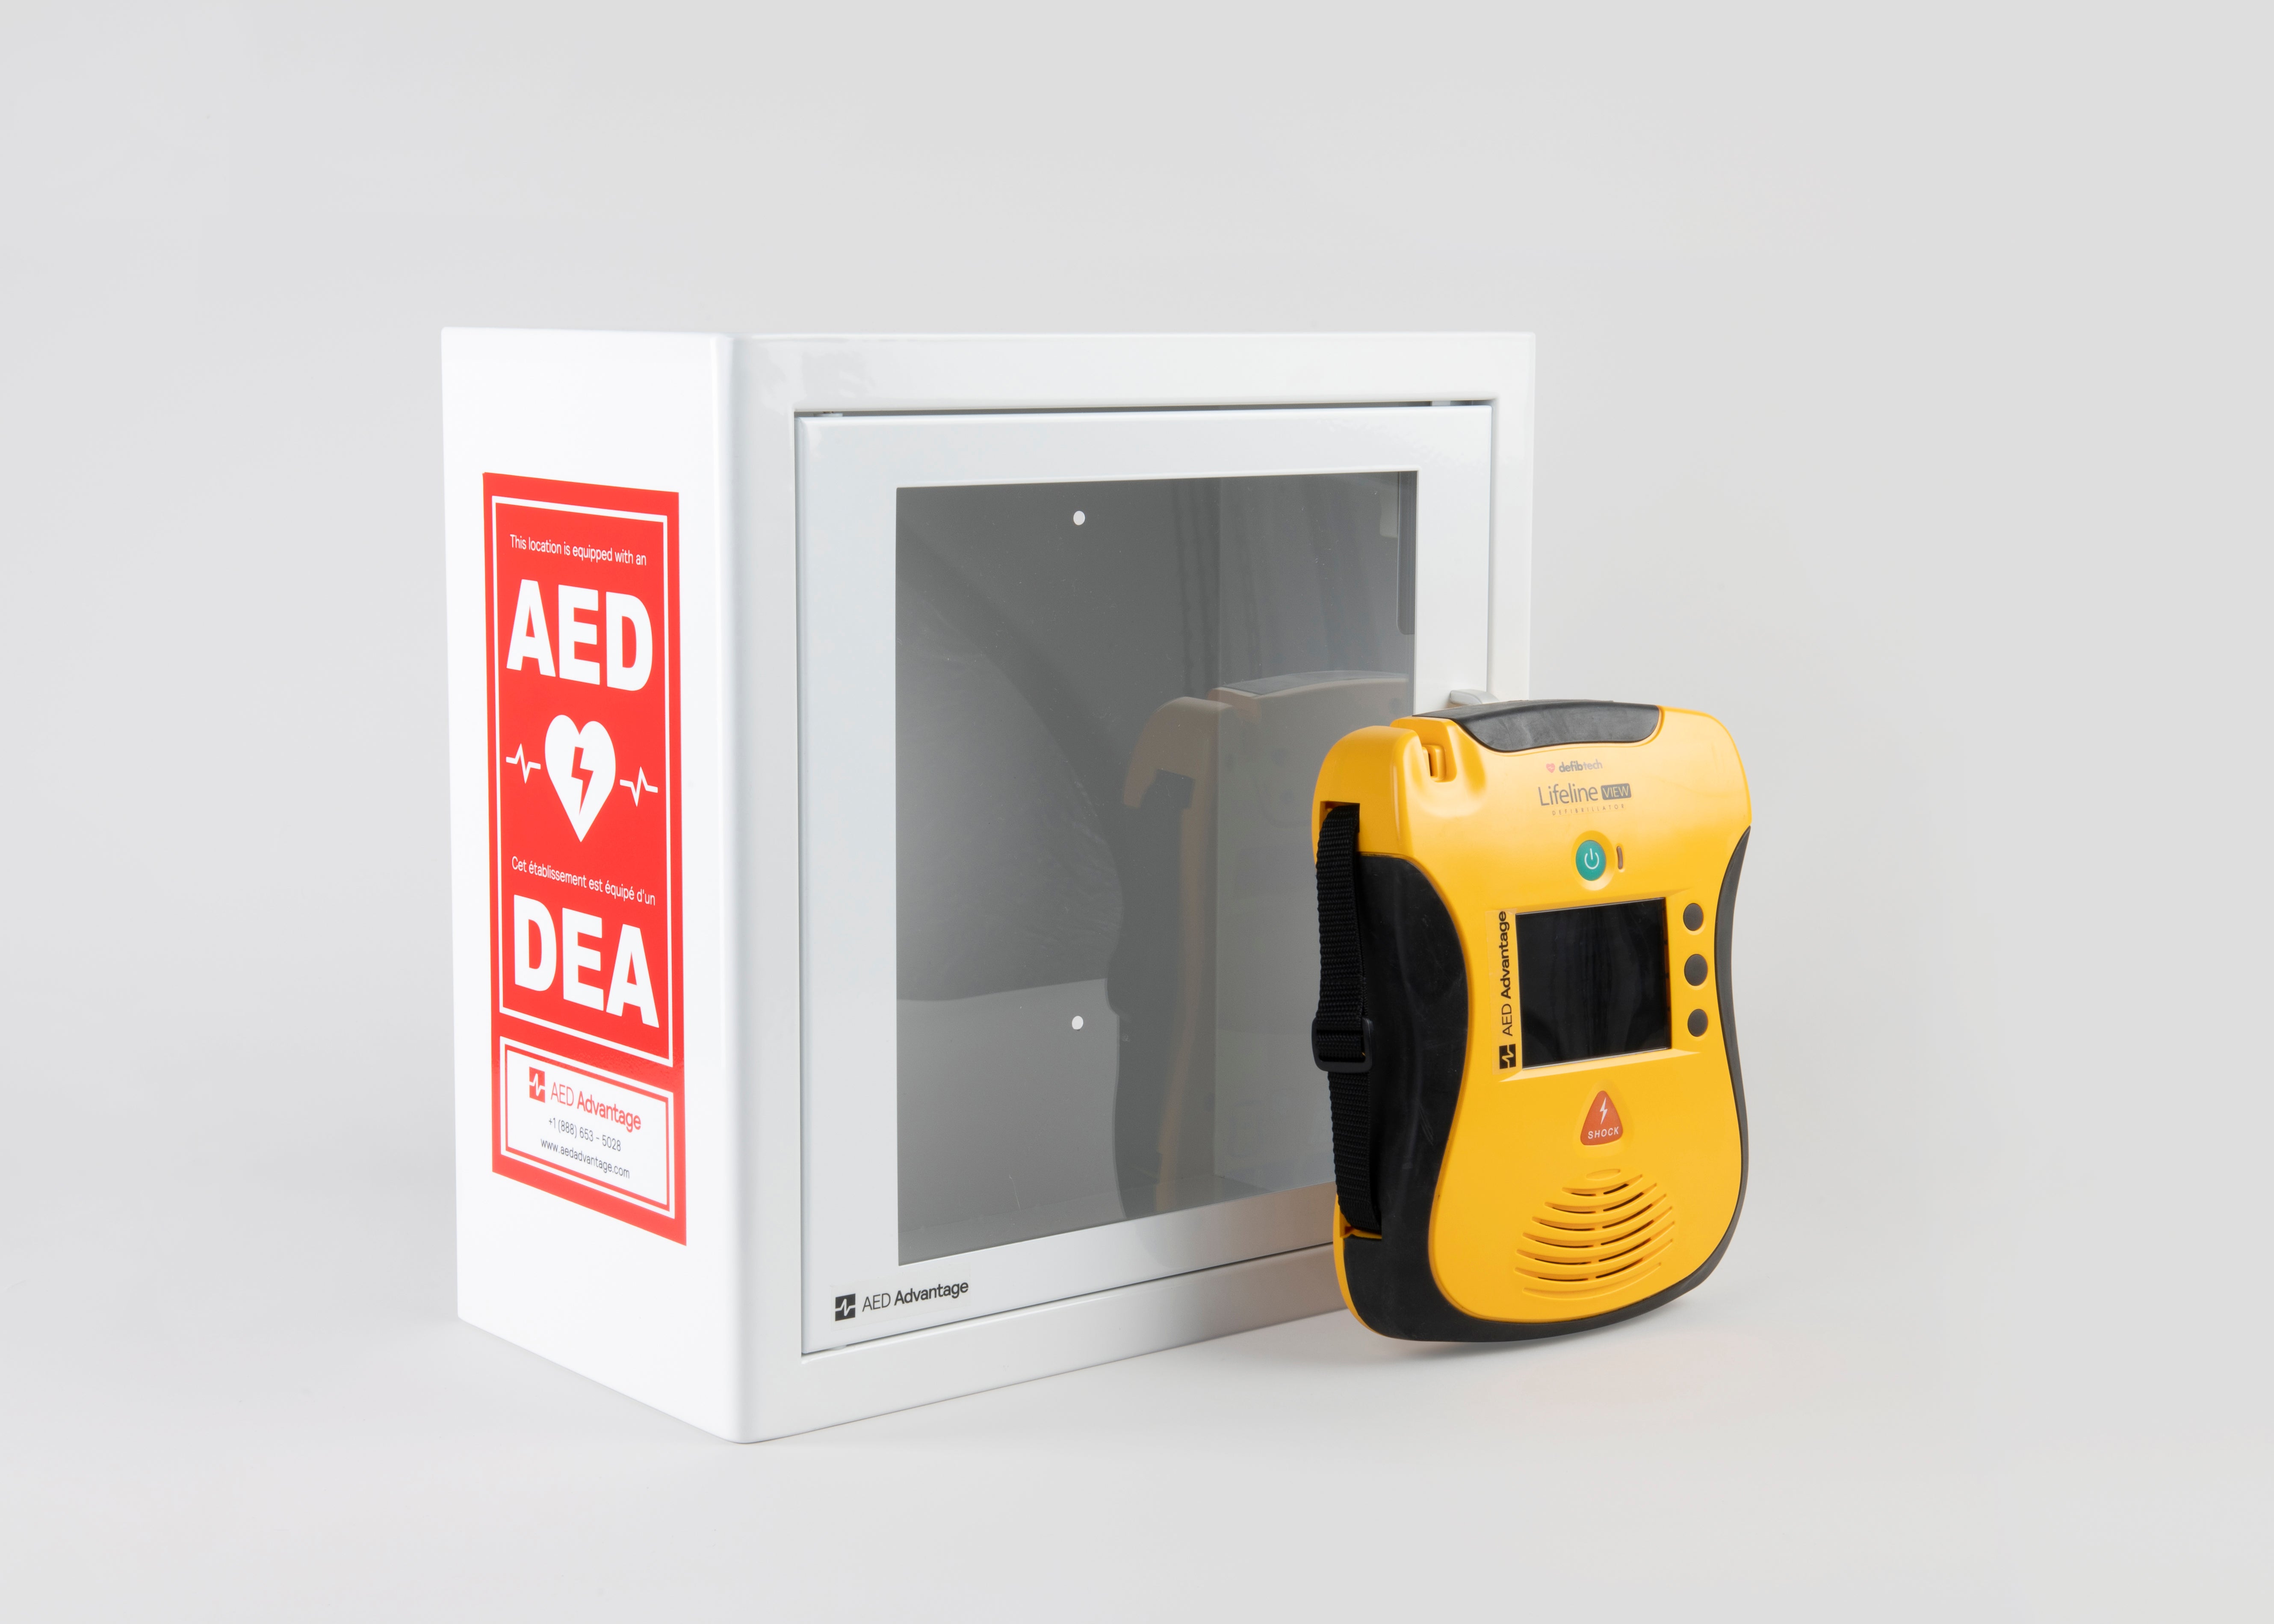 A yellow and black Defibtech Lifeline VIEW AED standing in front of a white metal cabinet with red decals